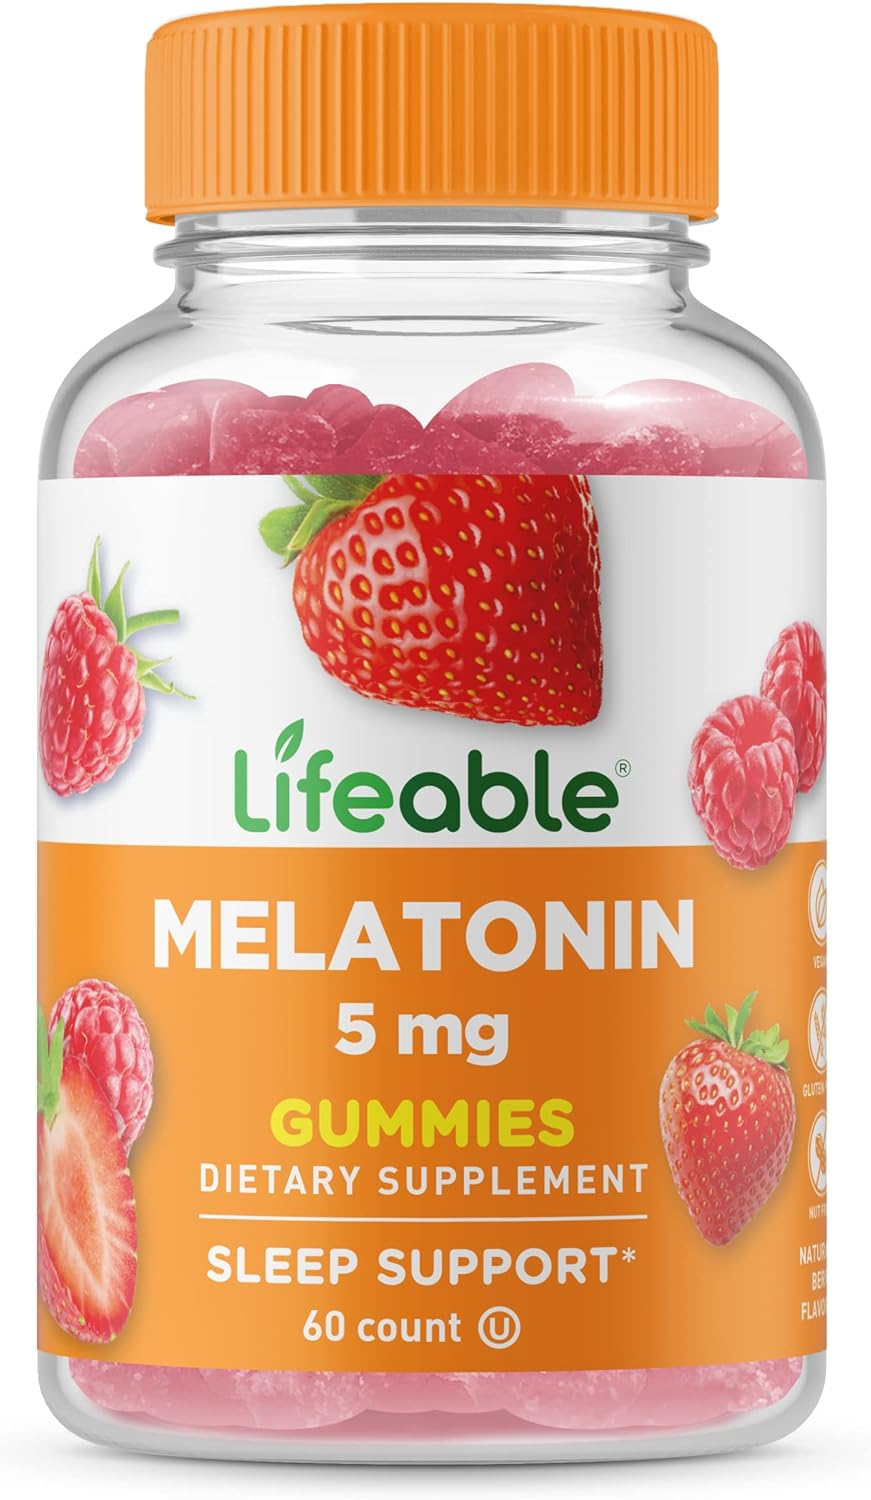 Lifeable Melatonin 5mg - Great Tasting Natural Flavor Gummy Supplement - Gluten Free Vegetarian GMO-Free Chewable - for Help Falling Asleep and Staying Sleep - for Adults, Man, Women - 60 Gummies